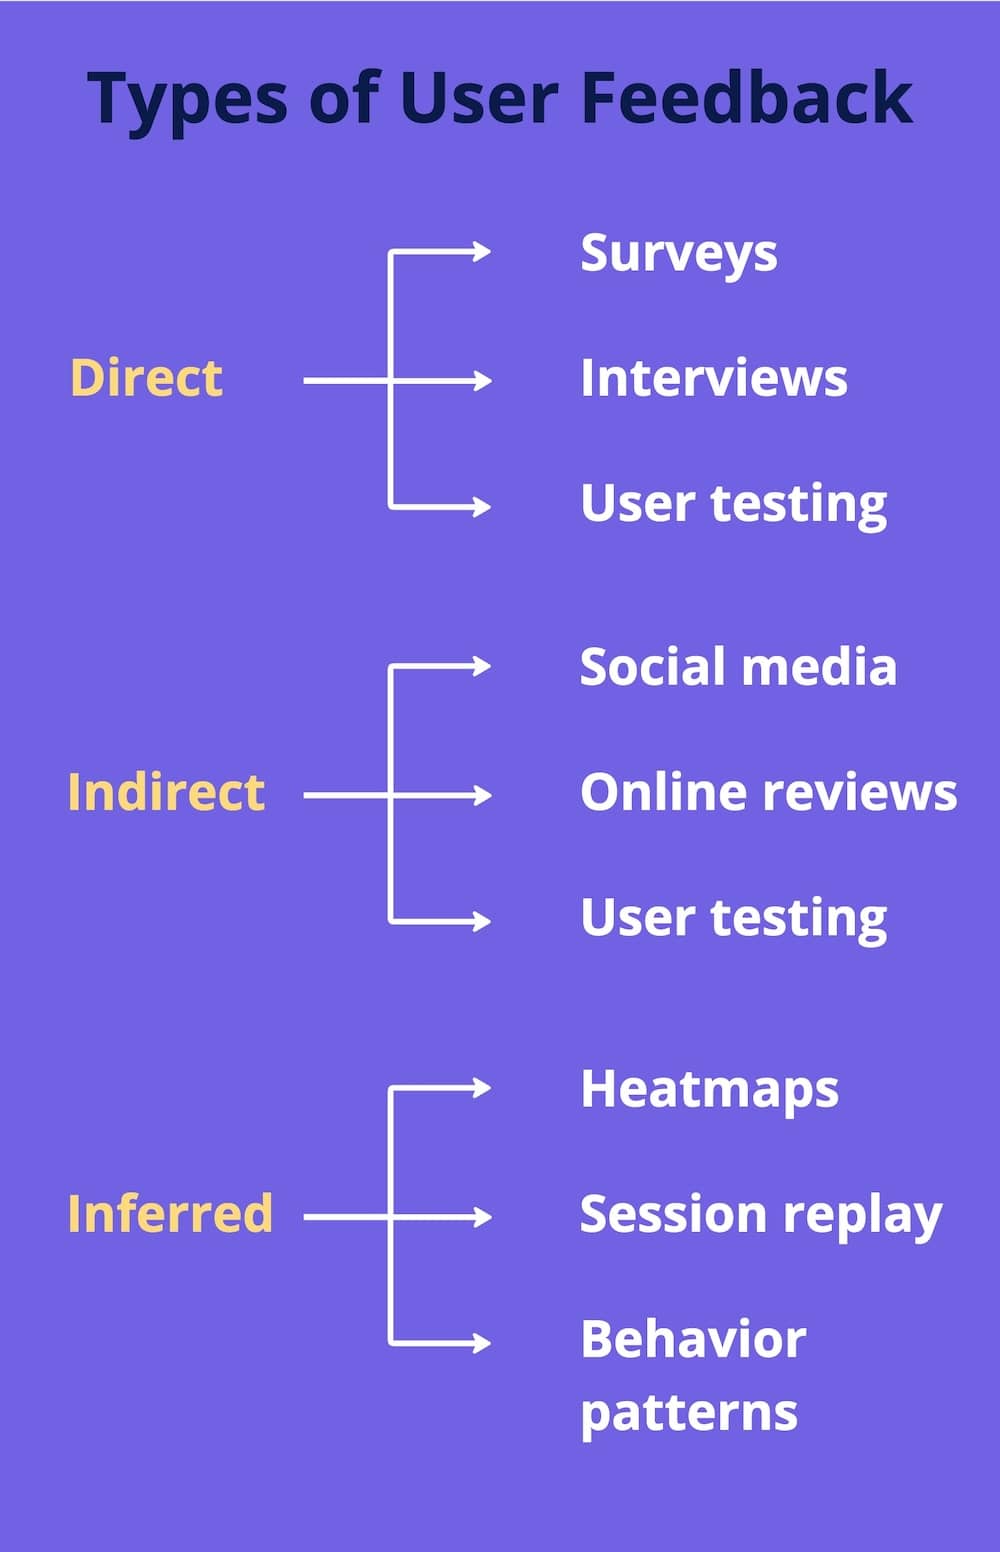 9 Types of user feedback